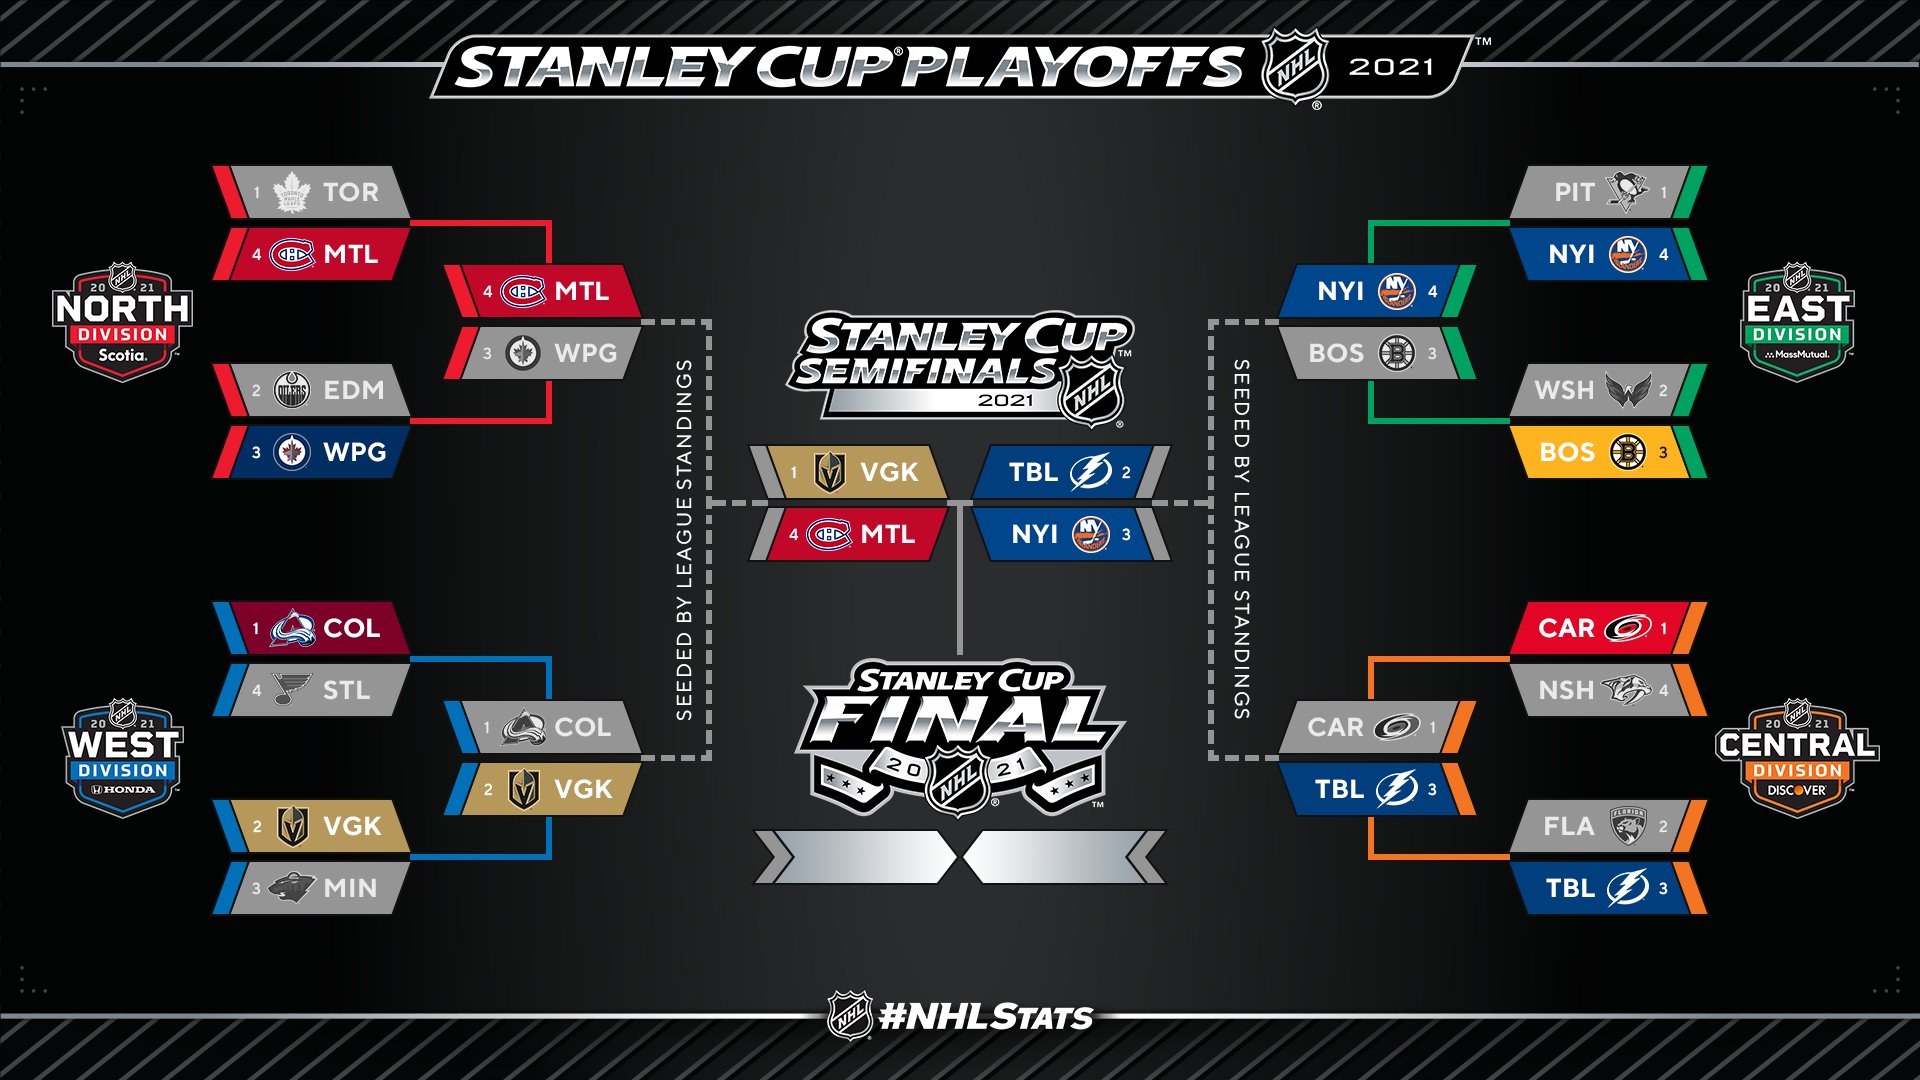 2021 Stanley Cup Playoffs: Semifinals matchups, schedule and TV info